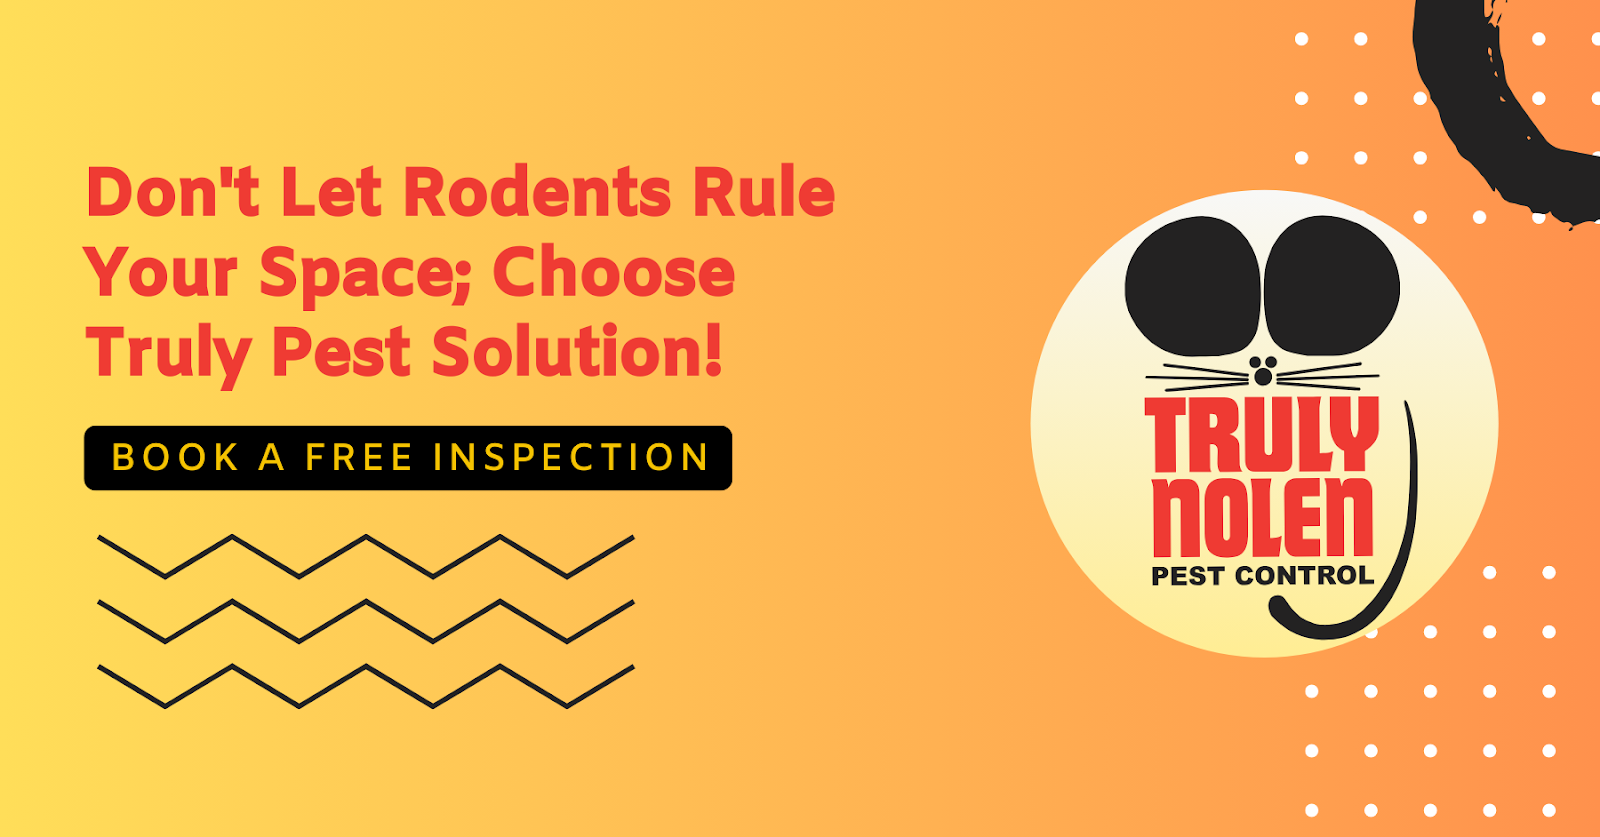 Don't Let Rodents Rule Your Space; Choose Truly Pest Solution!